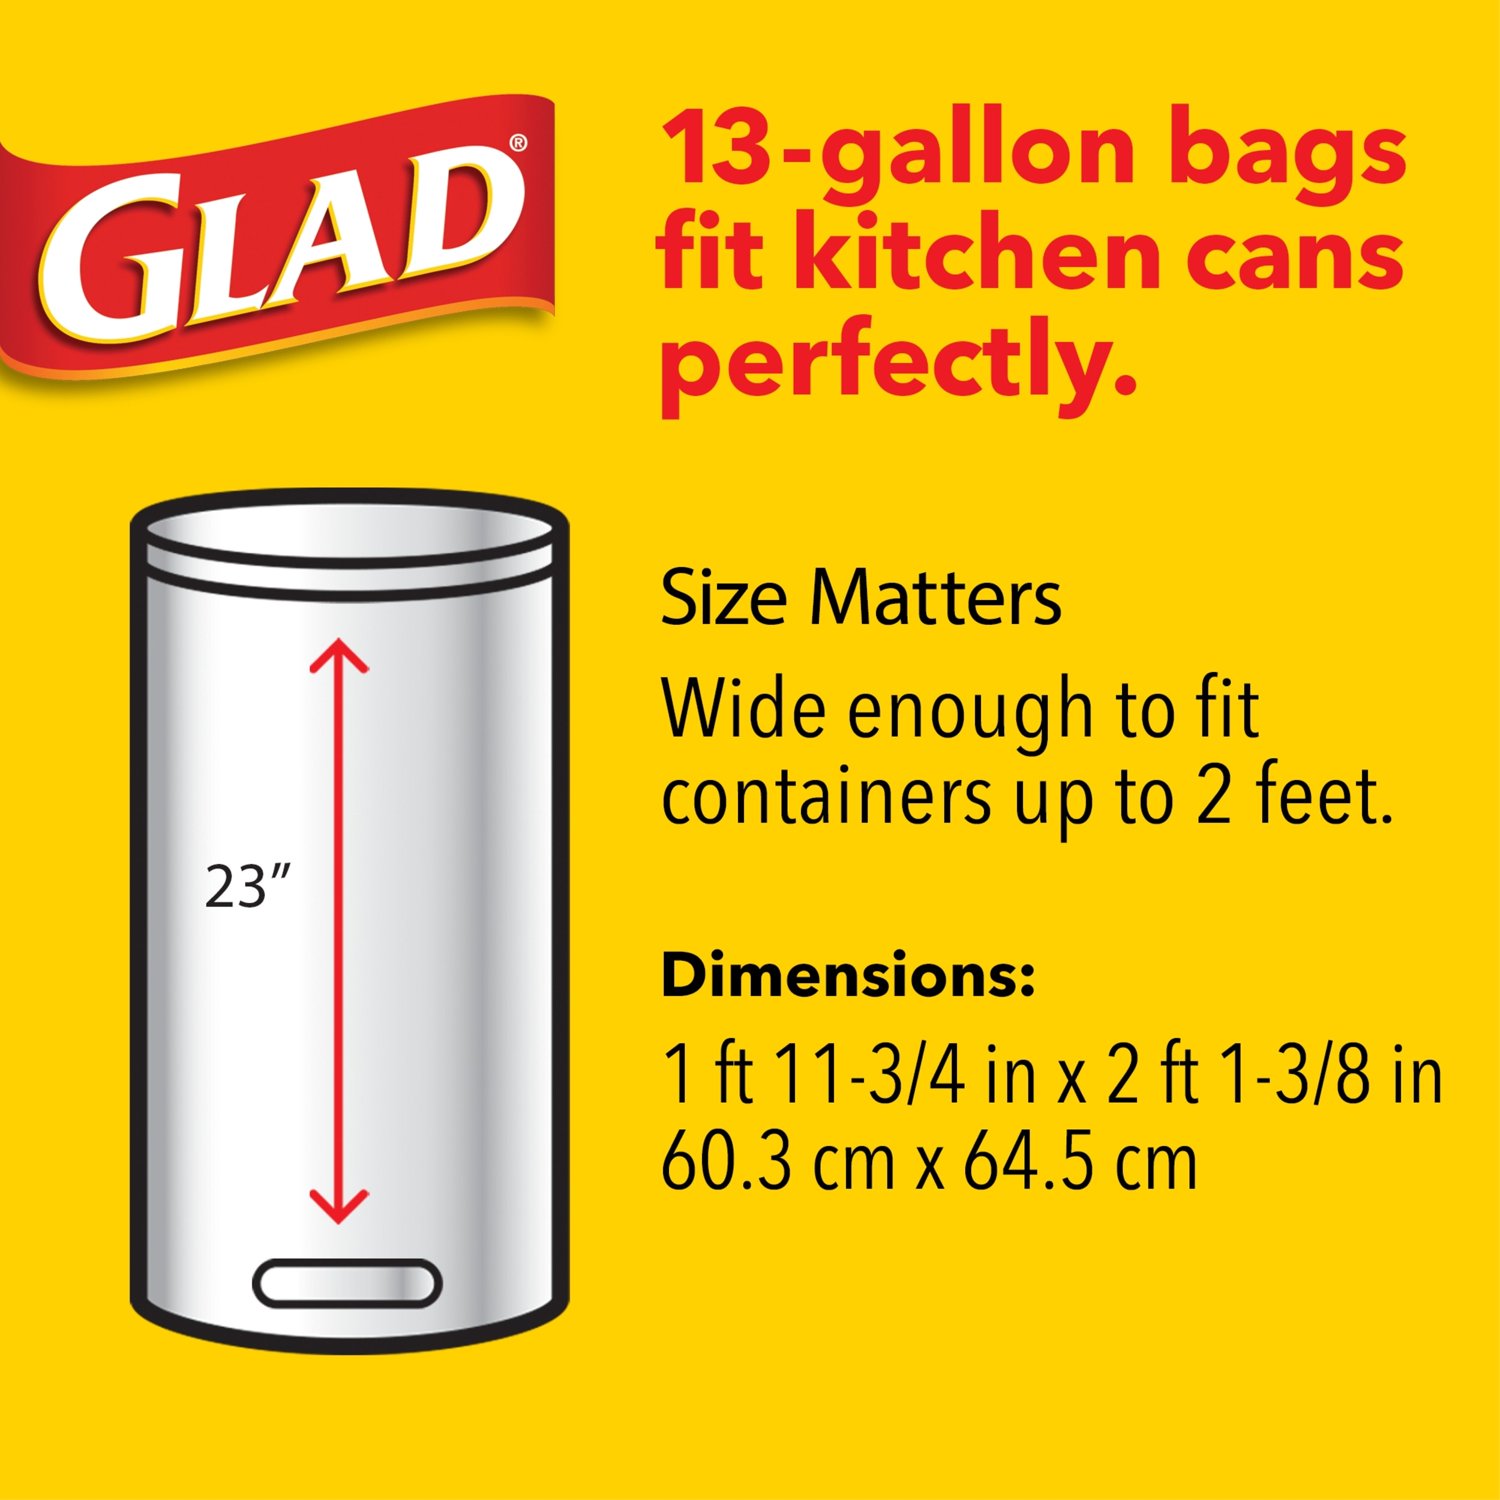 Glad Quick Tie 13 Gallon Tall Kitchen Trash Bags, 80 Bags - image 3 of 7